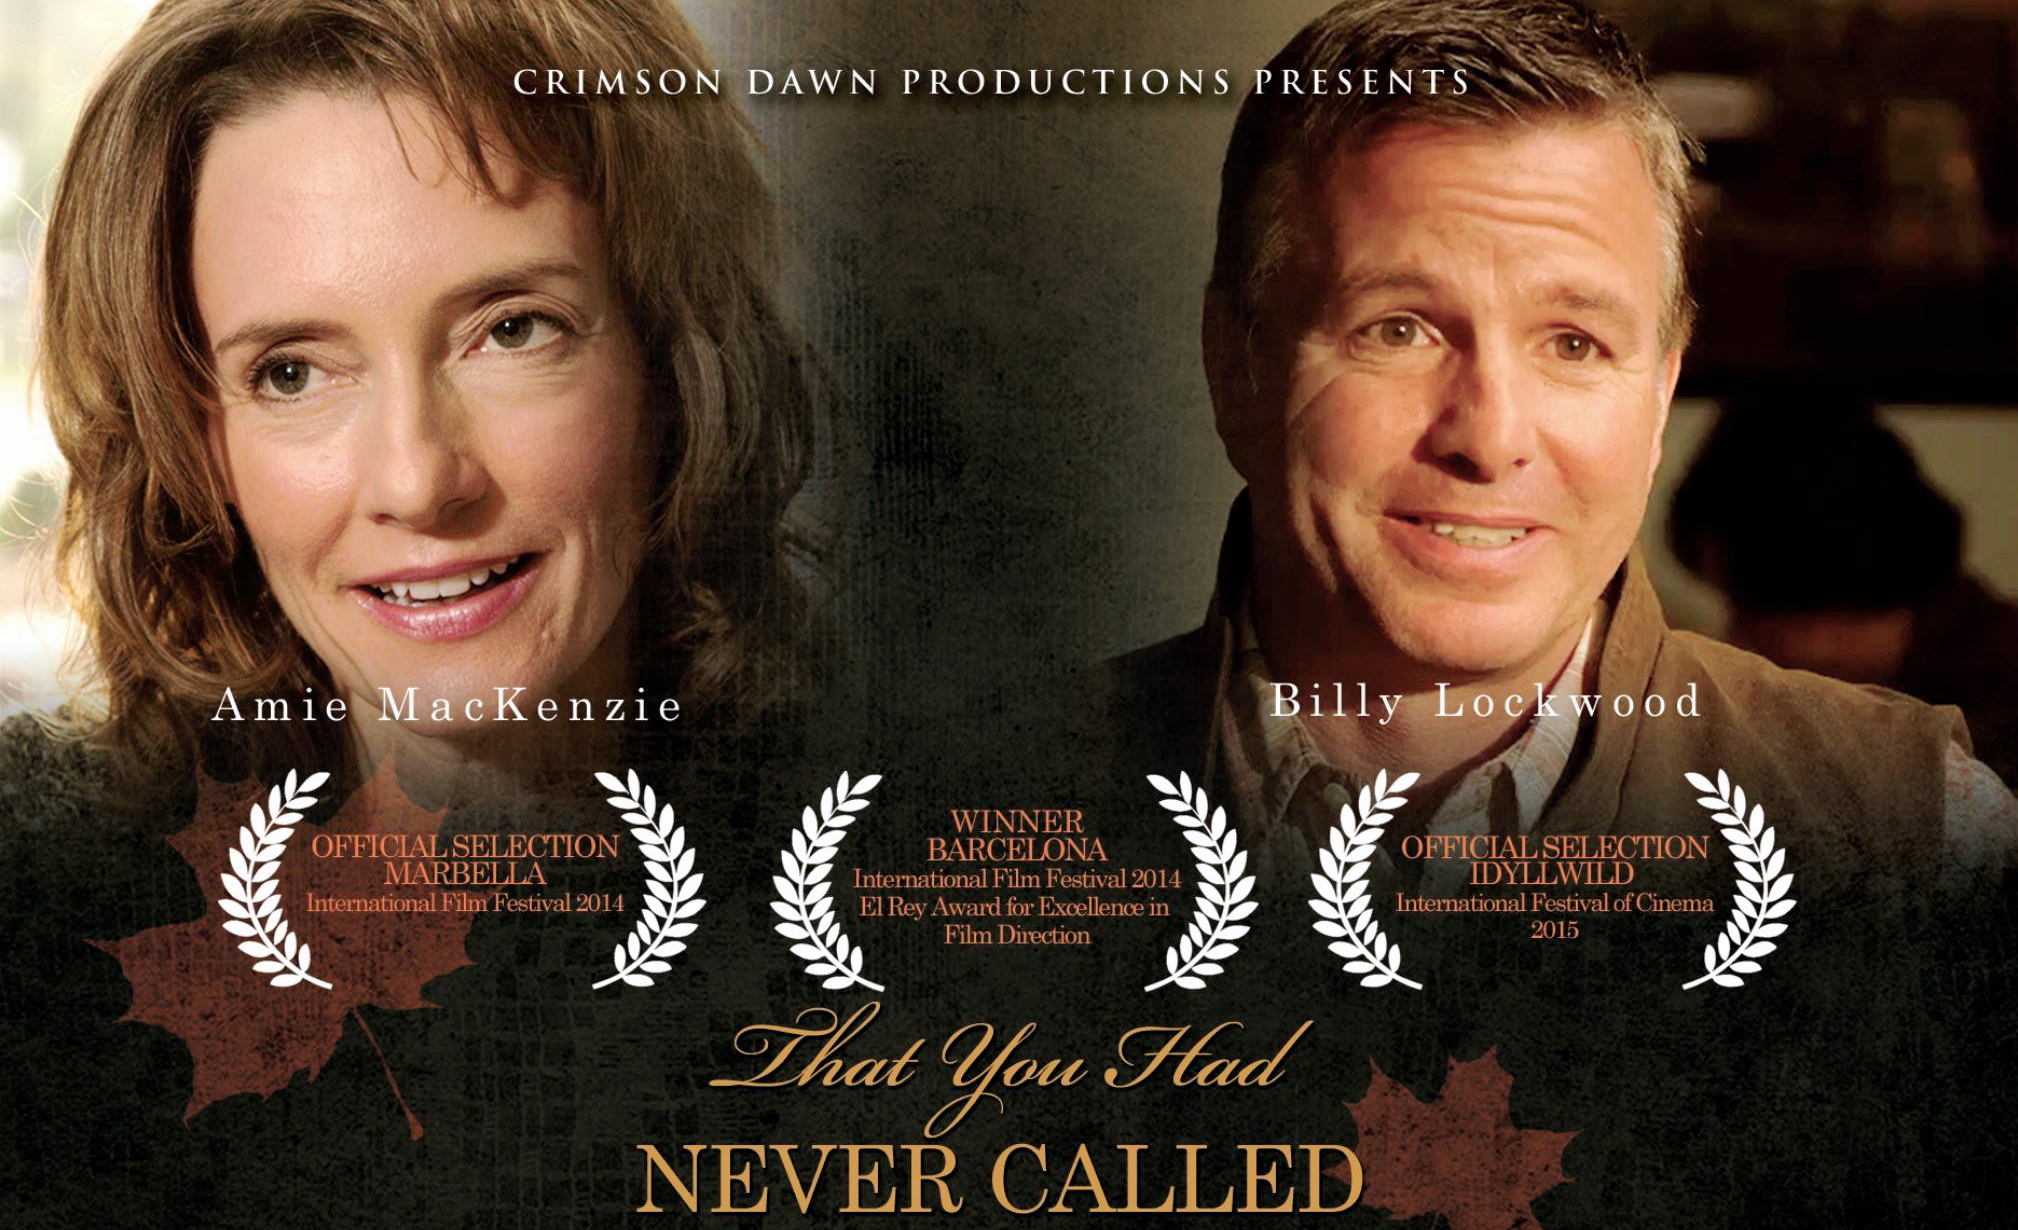 Billy Lockwood & Amie MacKenzie in the Award Winning film That You Had Never Called (2015).